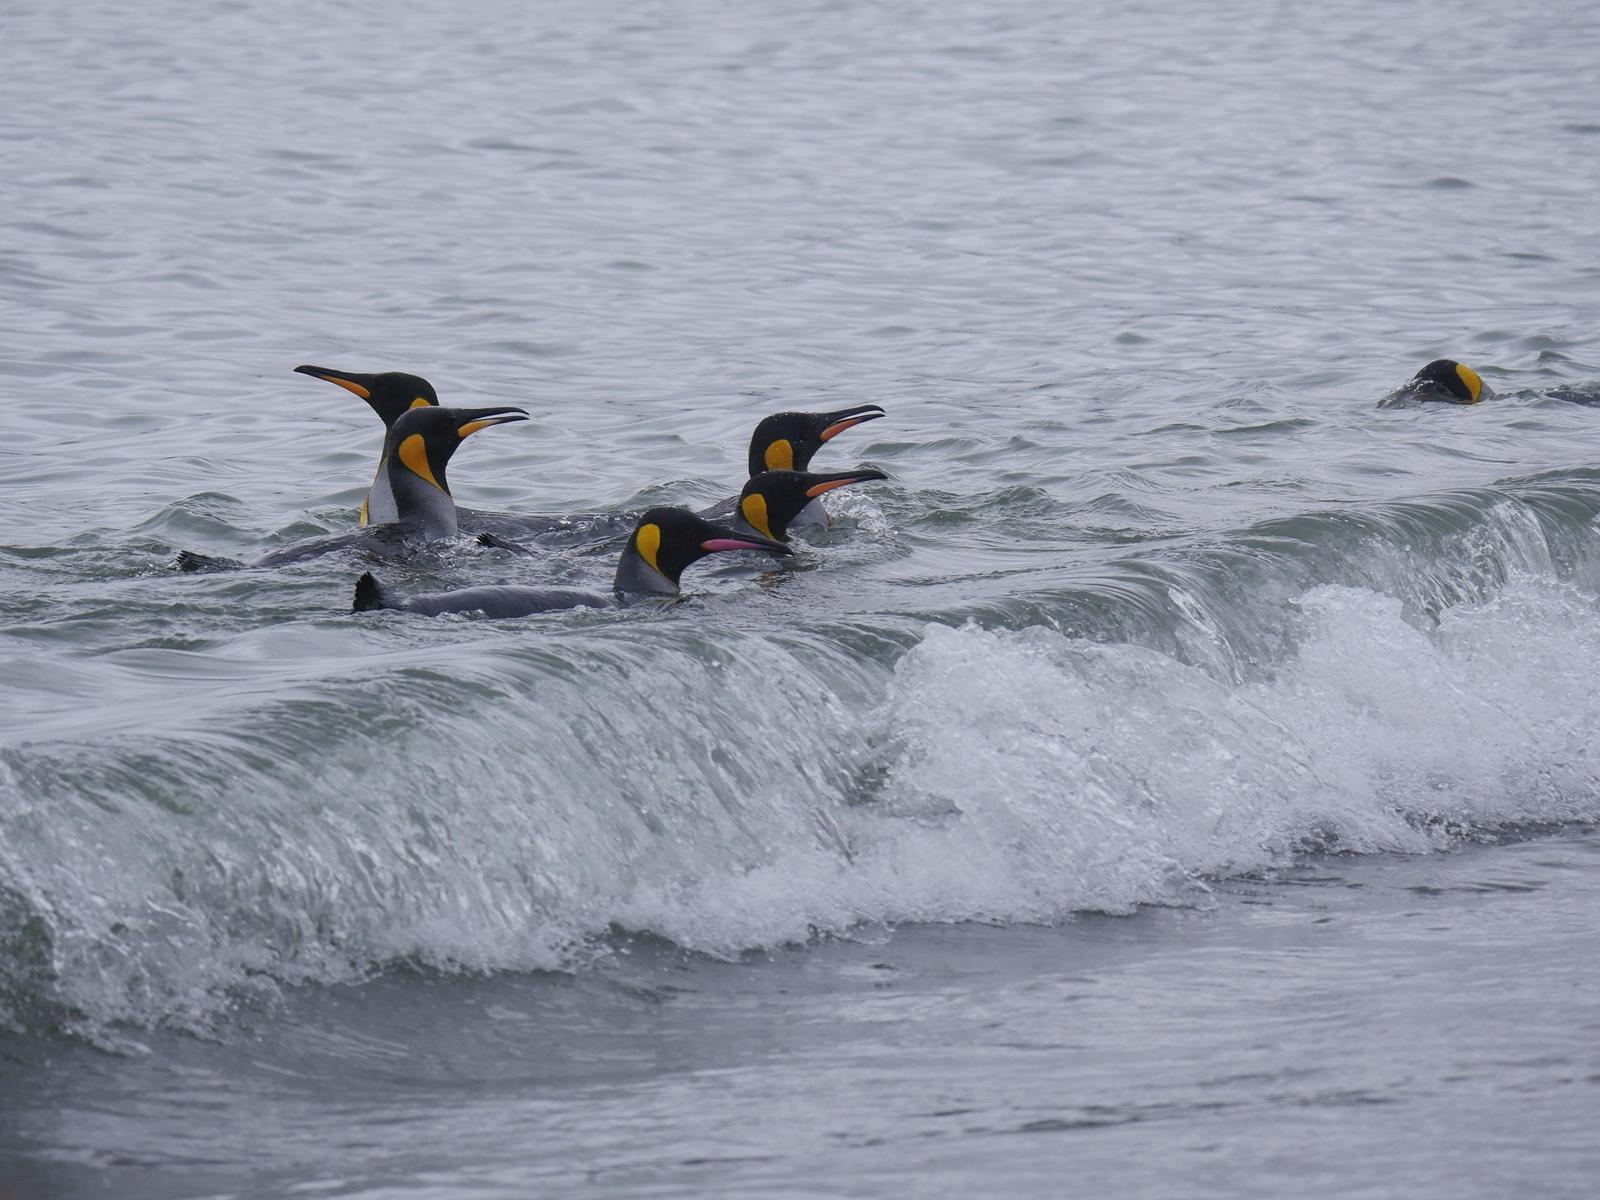 King Penguin Photo by Peter Lowe